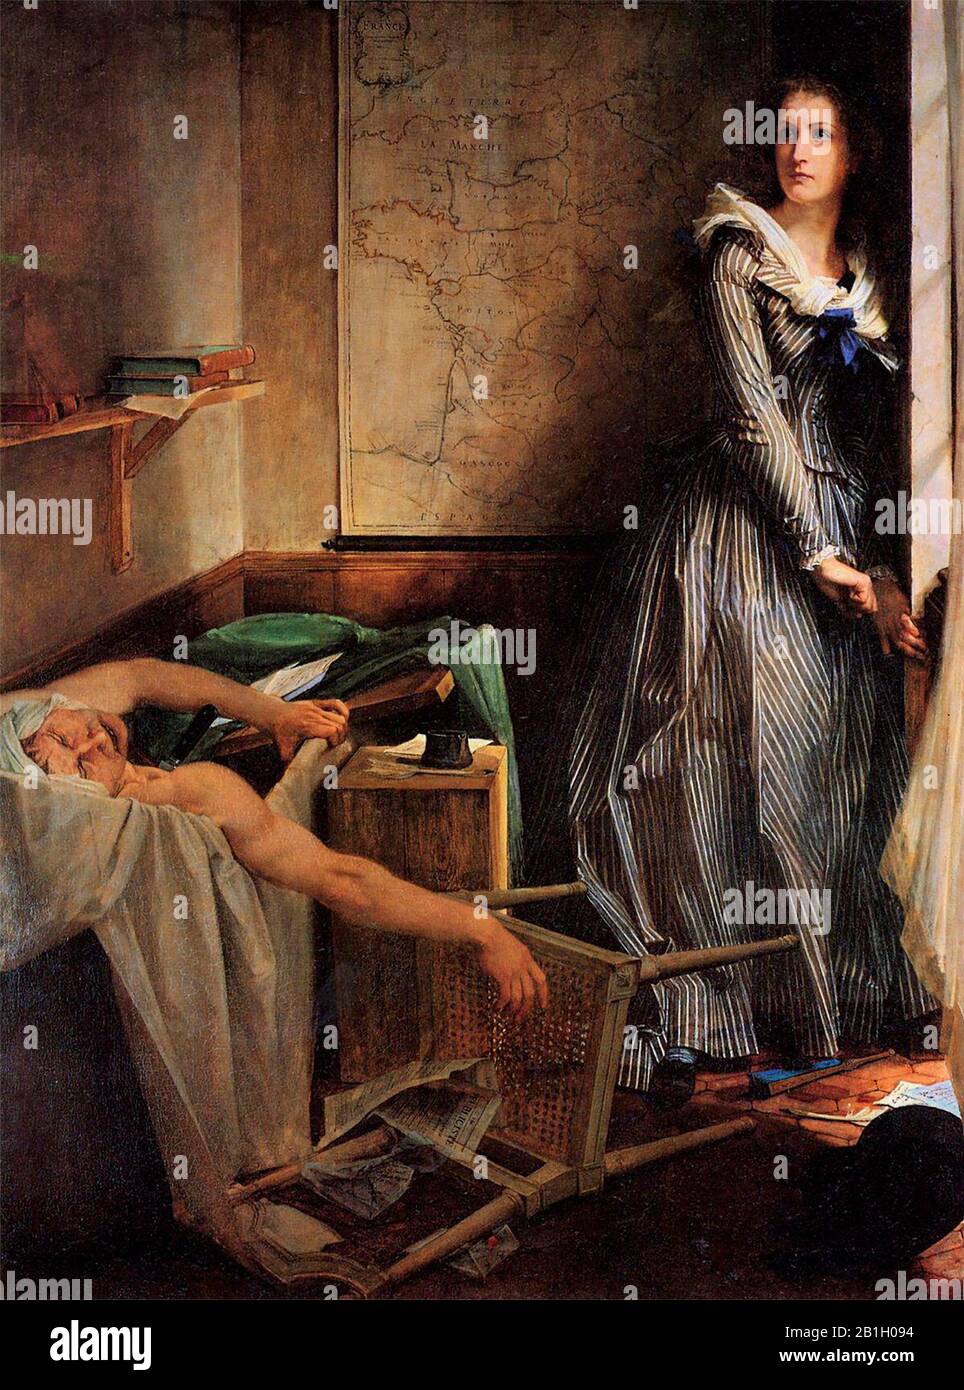 The assassination of Marat by Charlotte Corday - Paul-Jacques-Aimé Baudry, 1860 Stock Photo